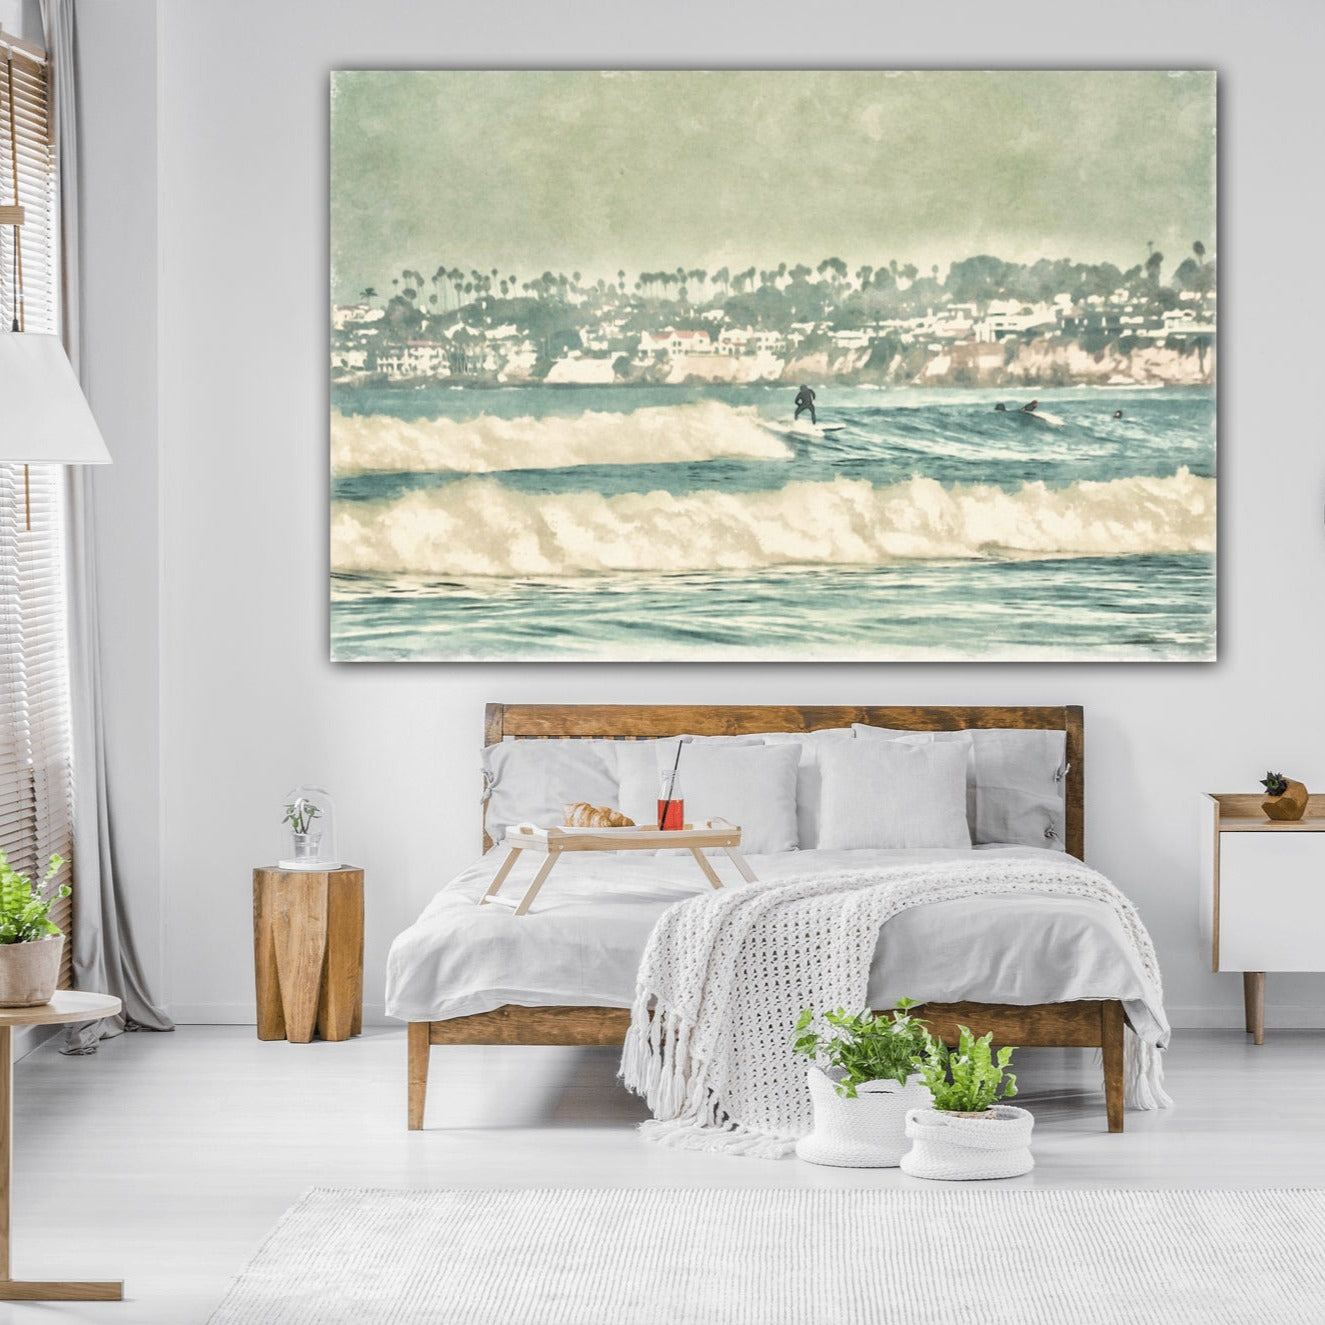 surfing the waves at mission beach bedroom decor by jacqueline mb designs 